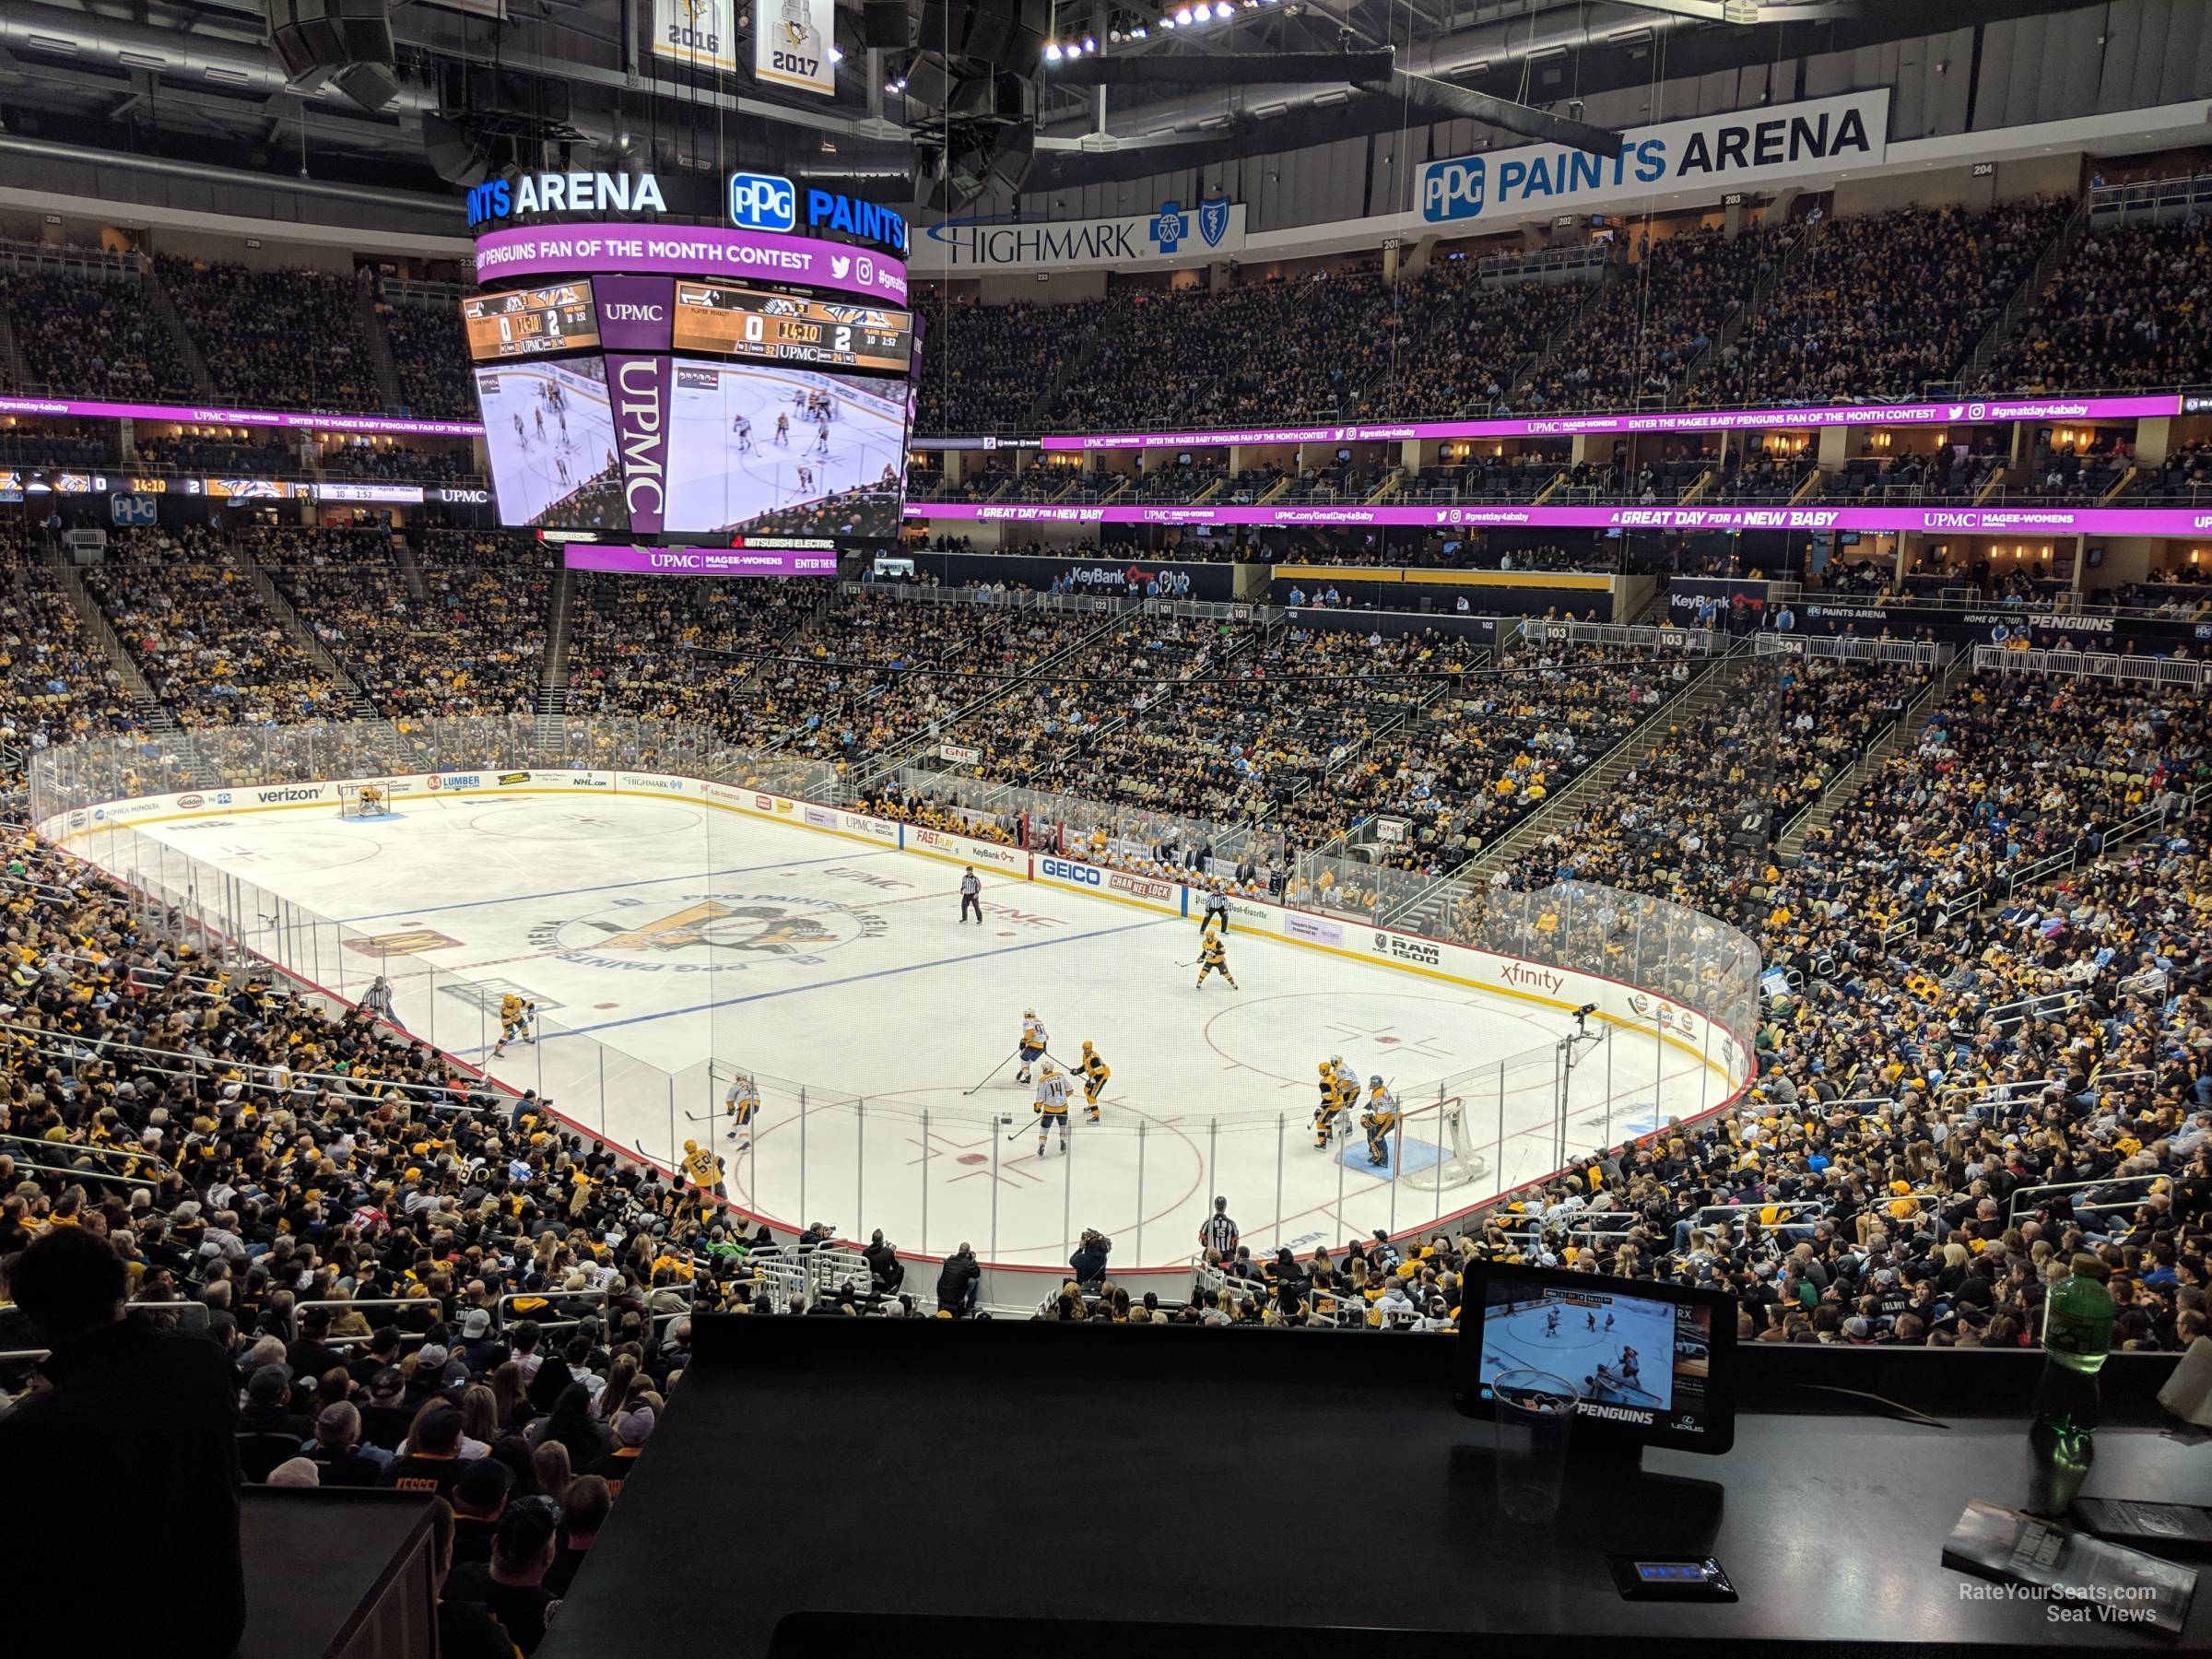 loge box 15 seat view  for hockey - ppg paints arena